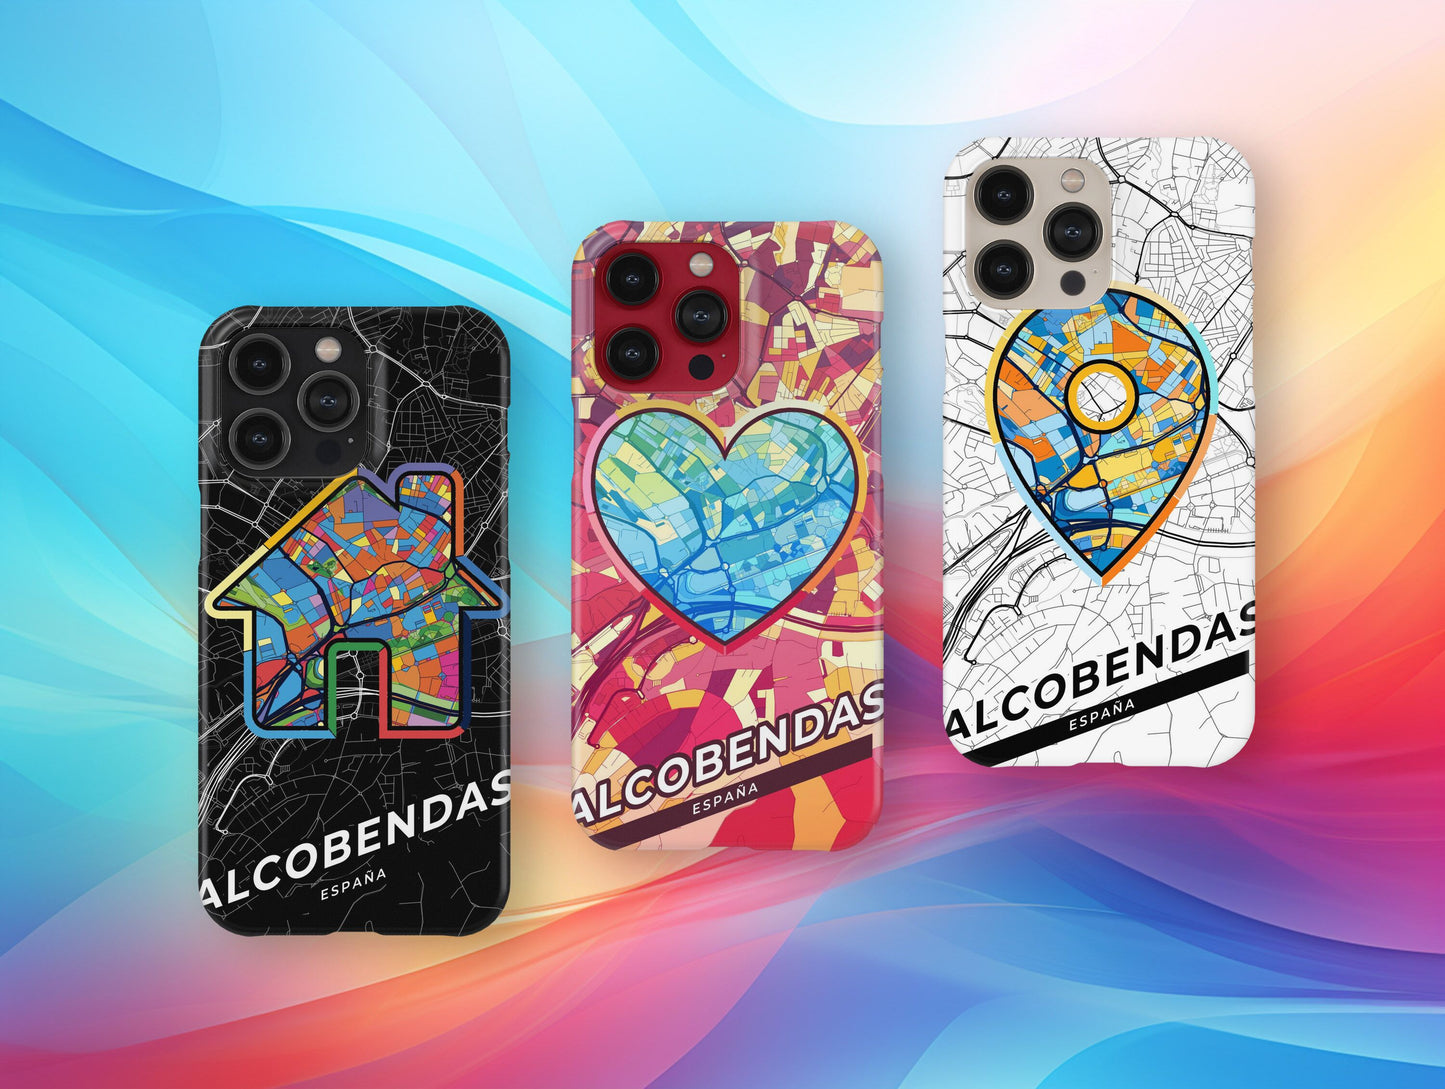 Alcobendas Spain slim phone case with colorful icon. Birthday, wedding or housewarming gift. Couple match cases.